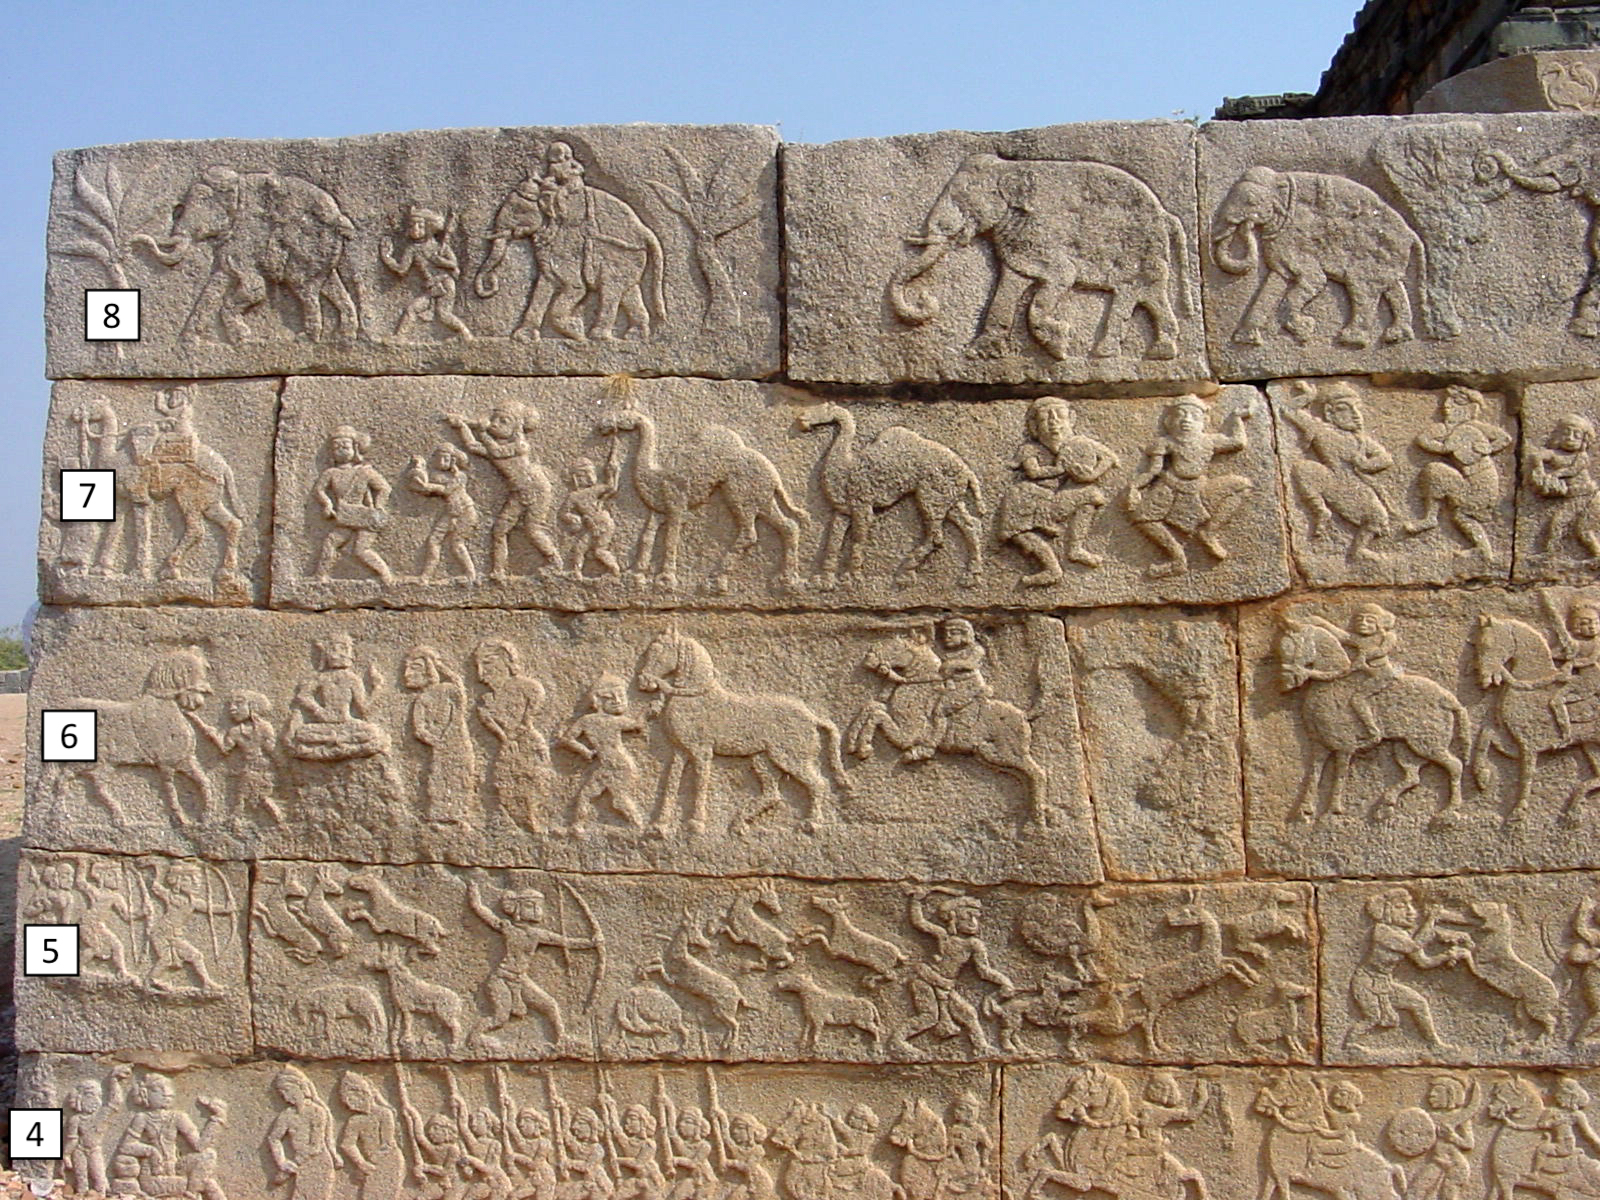 carved stone wall showing many animals and people